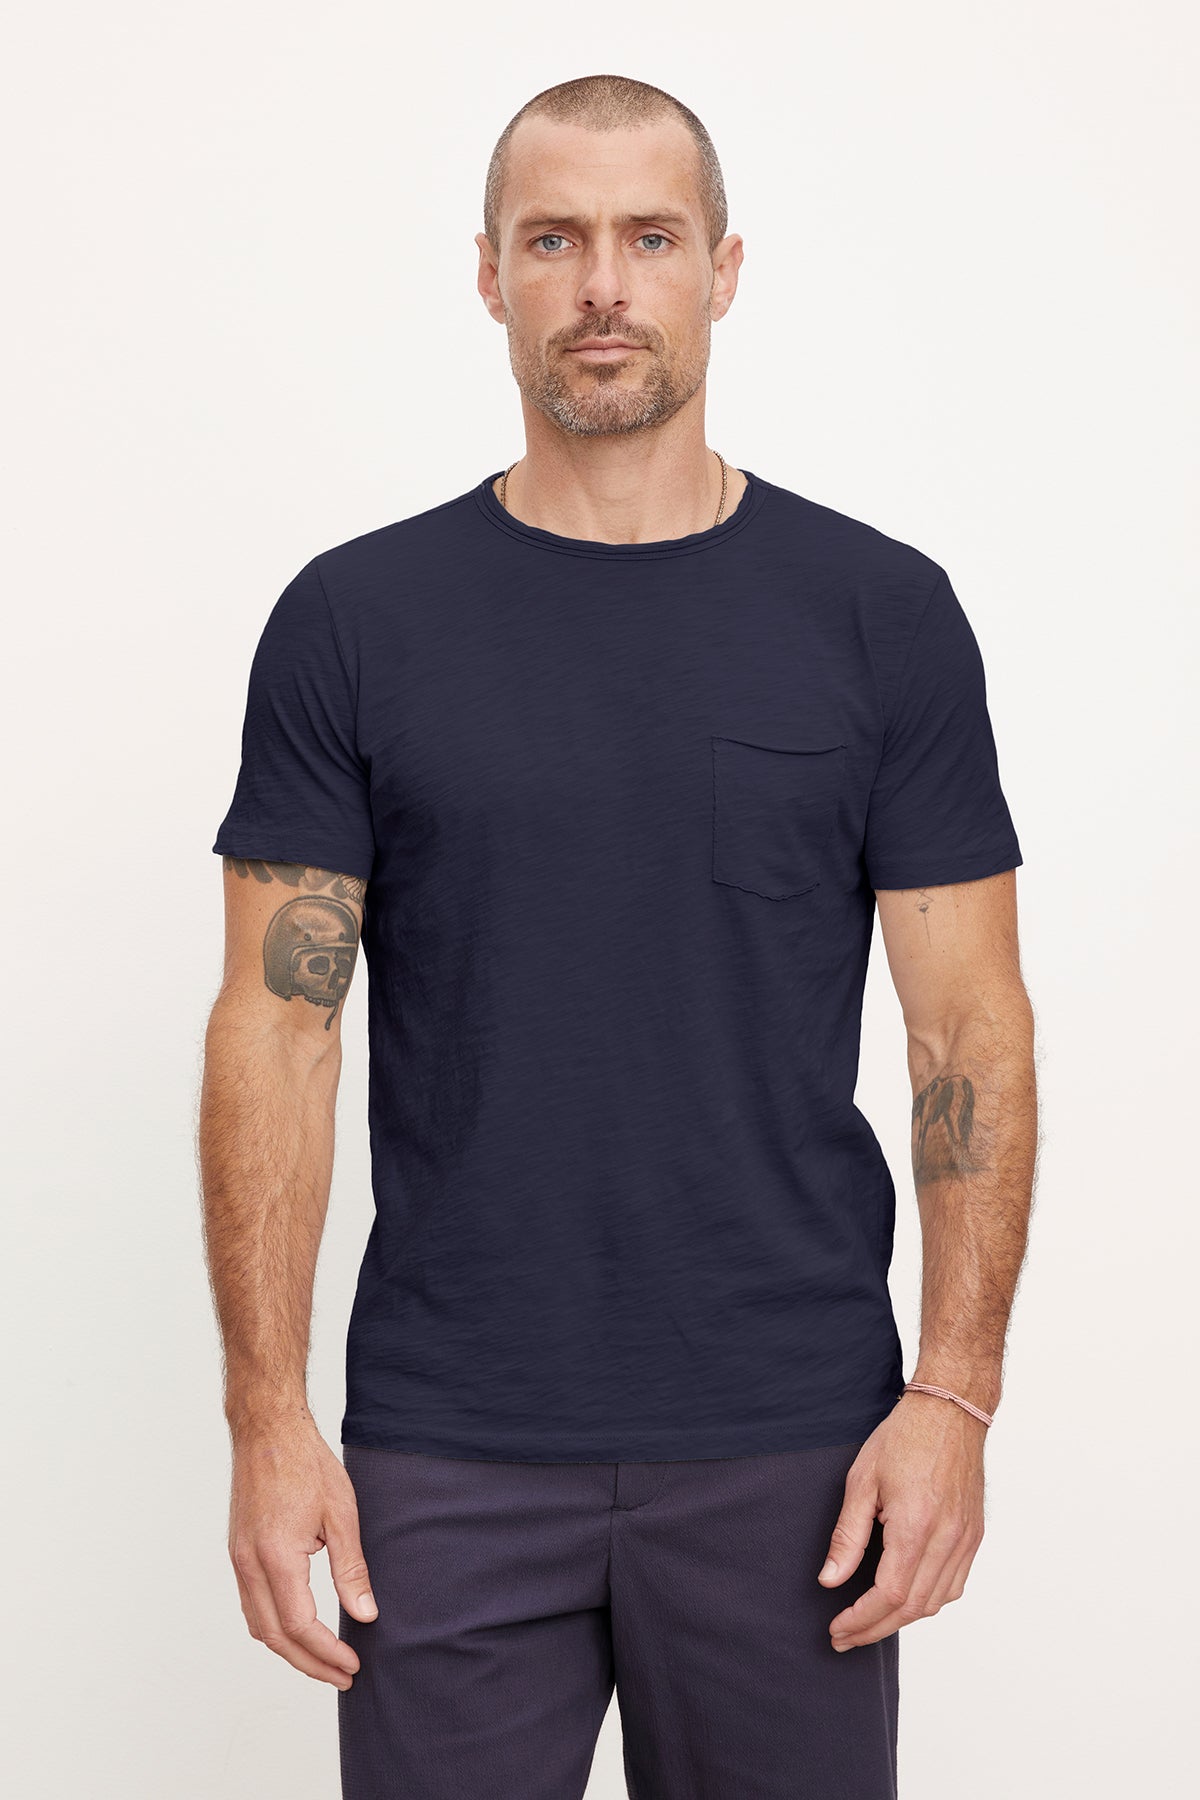 A man with short hair and tattoos on his arms, wearing a dark blue textured cotton slub CHAD TEE by Velvet by Graham & Spencer and navy blue pants, standing against a plain white background.-36909363757249